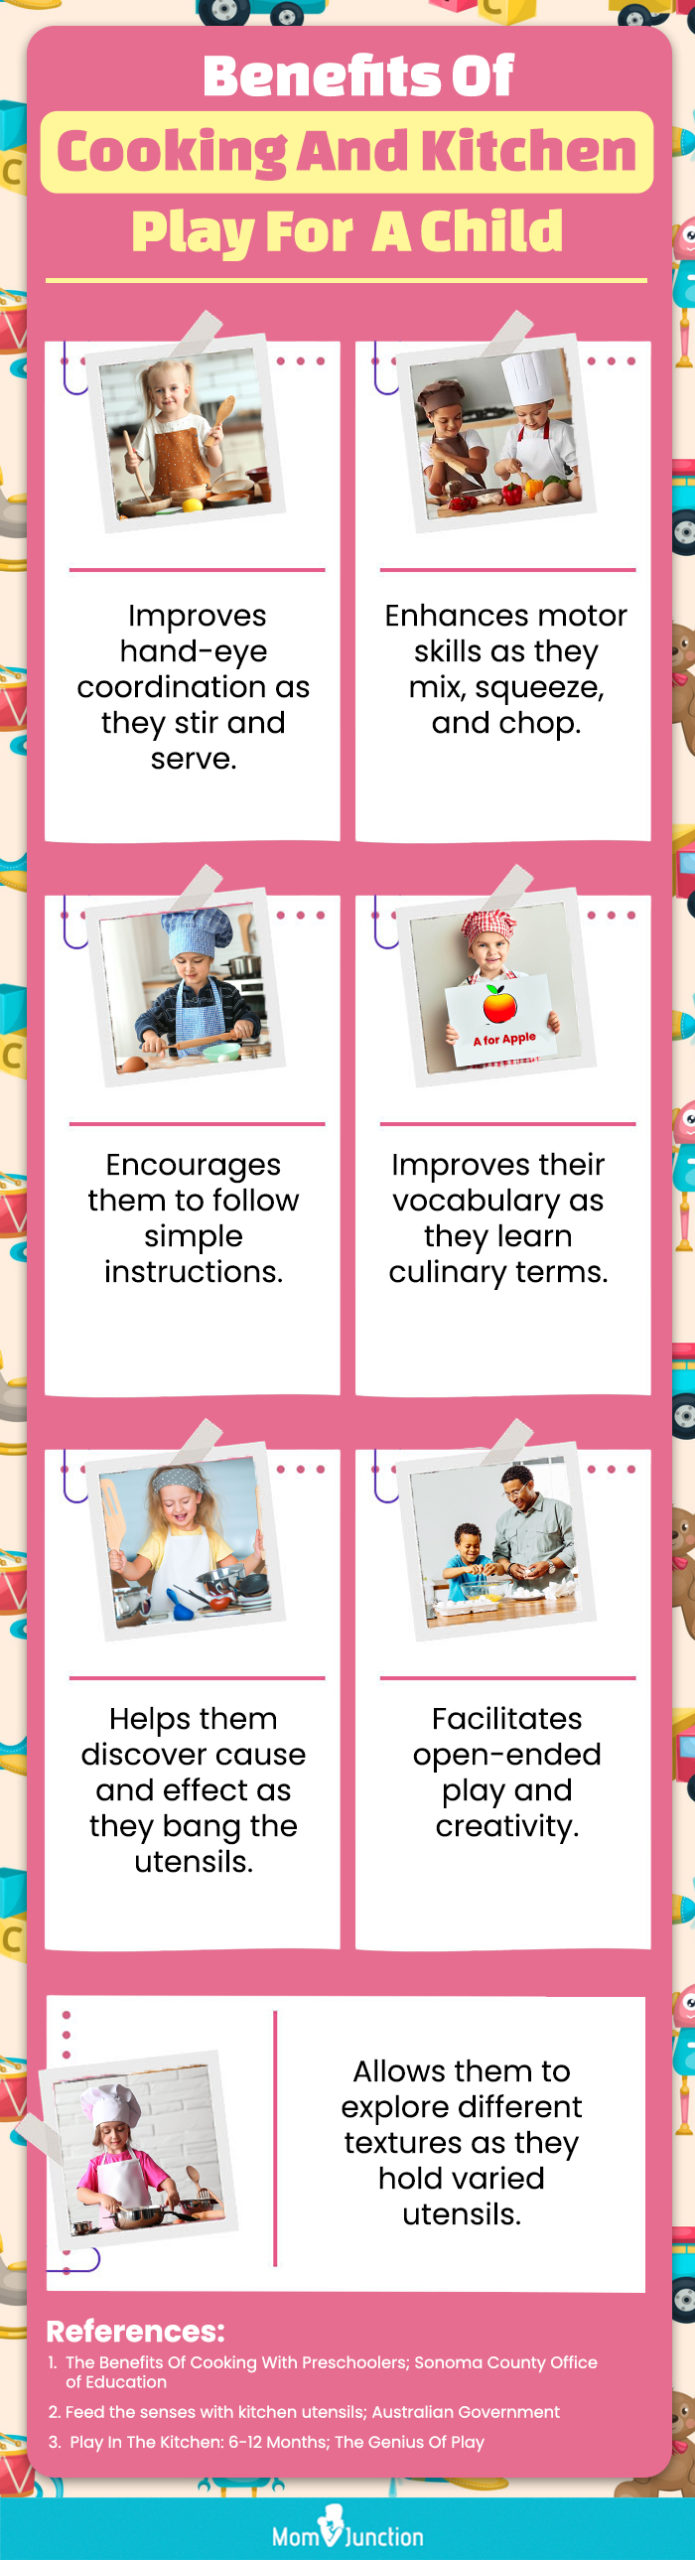 Benefits Of Cooking And Kitchen Play A Child (infographic)